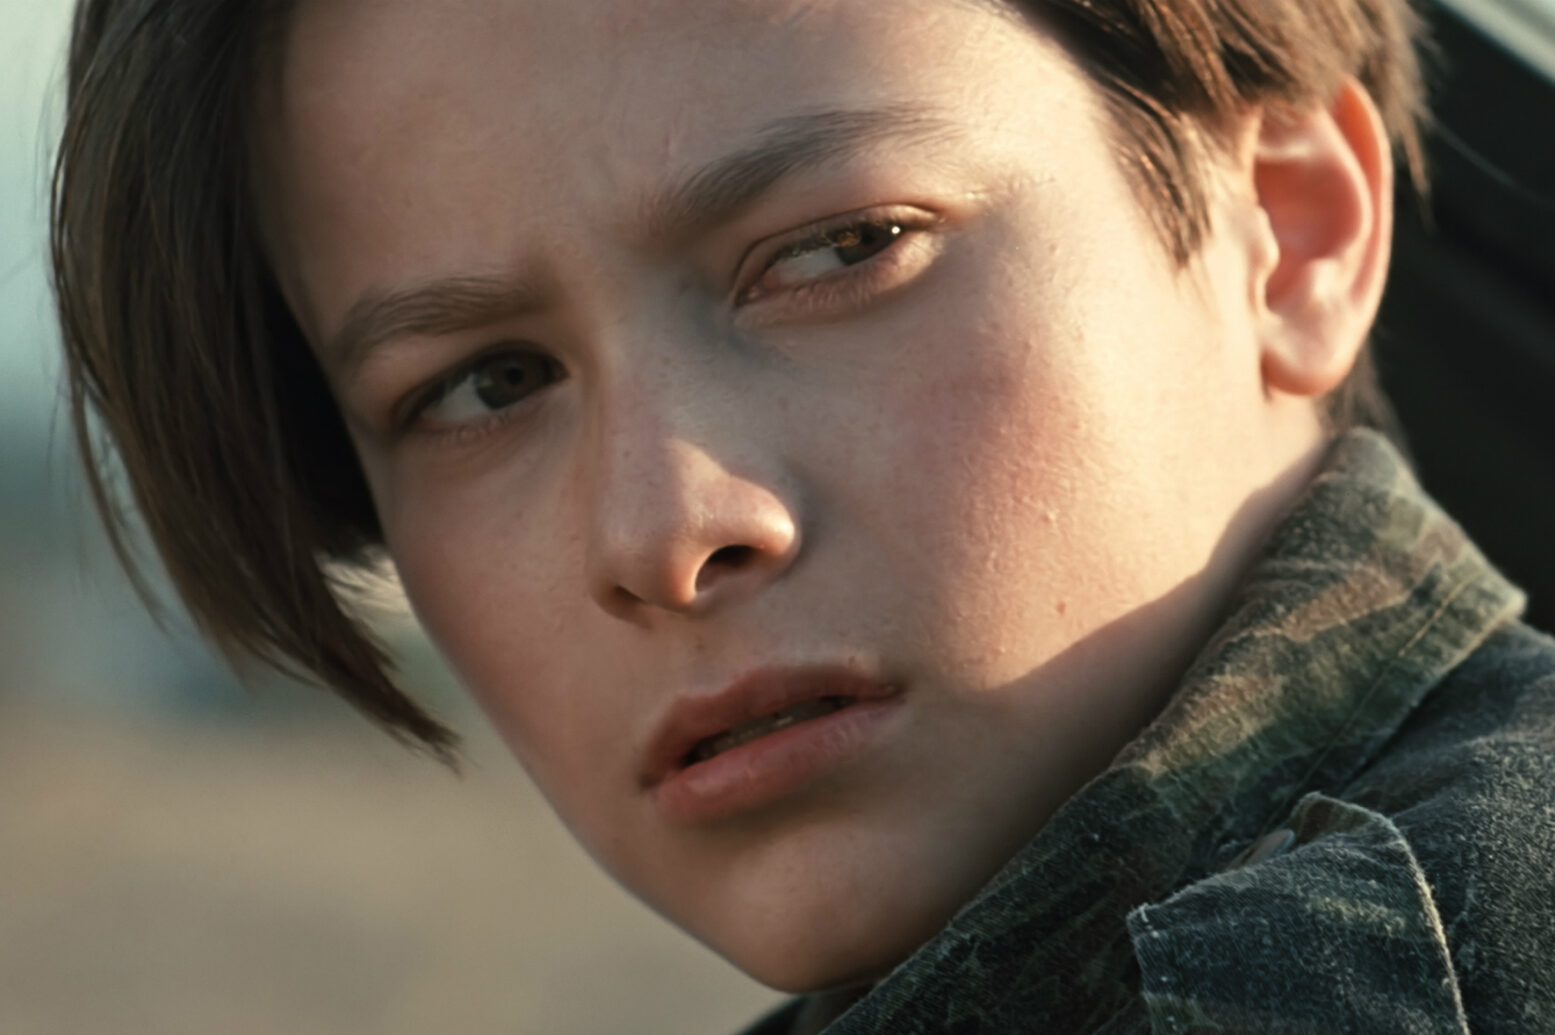 Terminator 2 Star Edward Furlong Where Is He And What Happened?